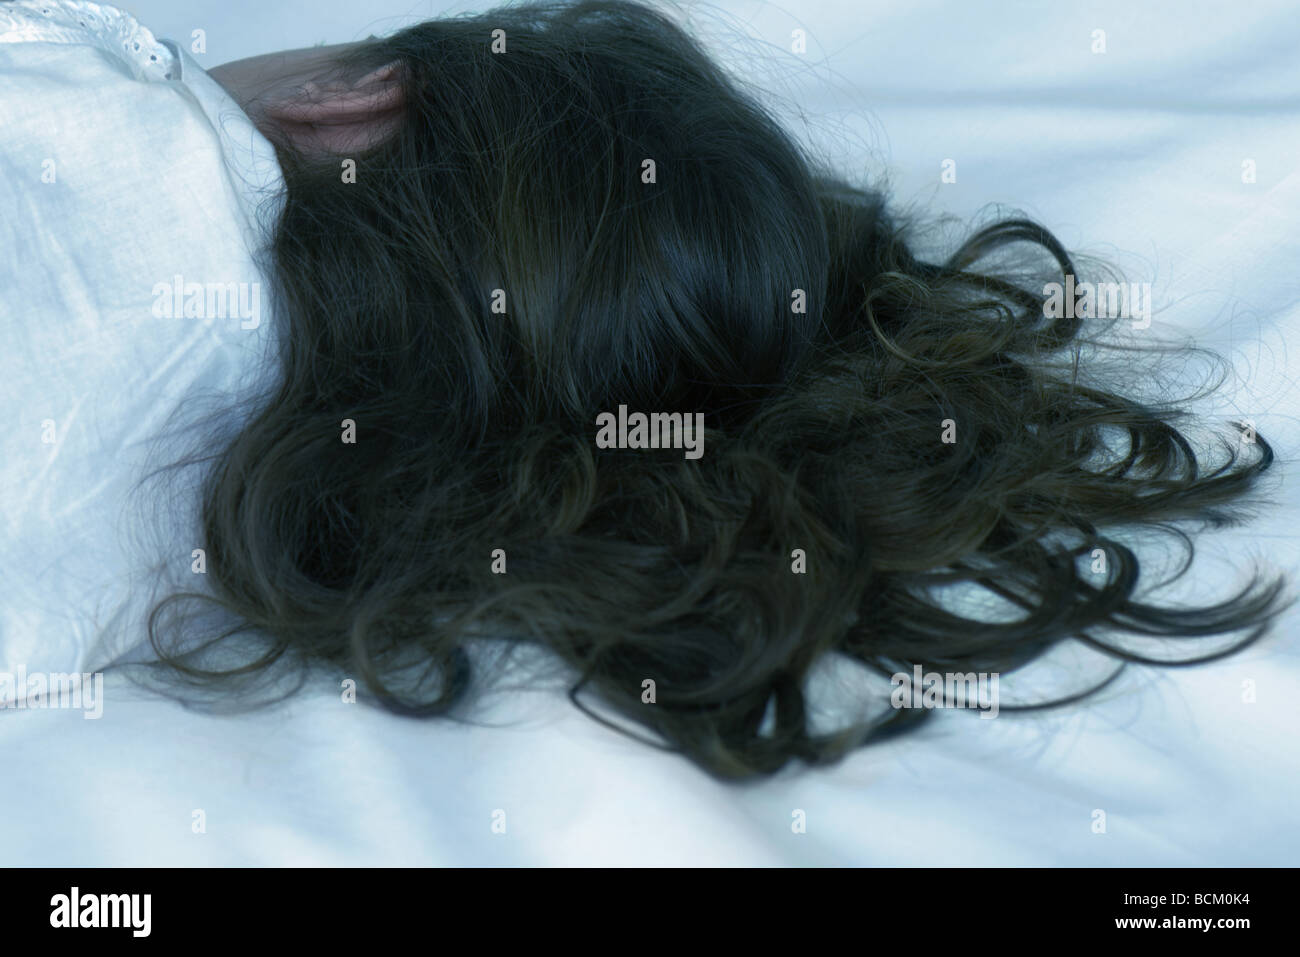 Little girl sleeping, head and shoulders, rear view Stock Photo